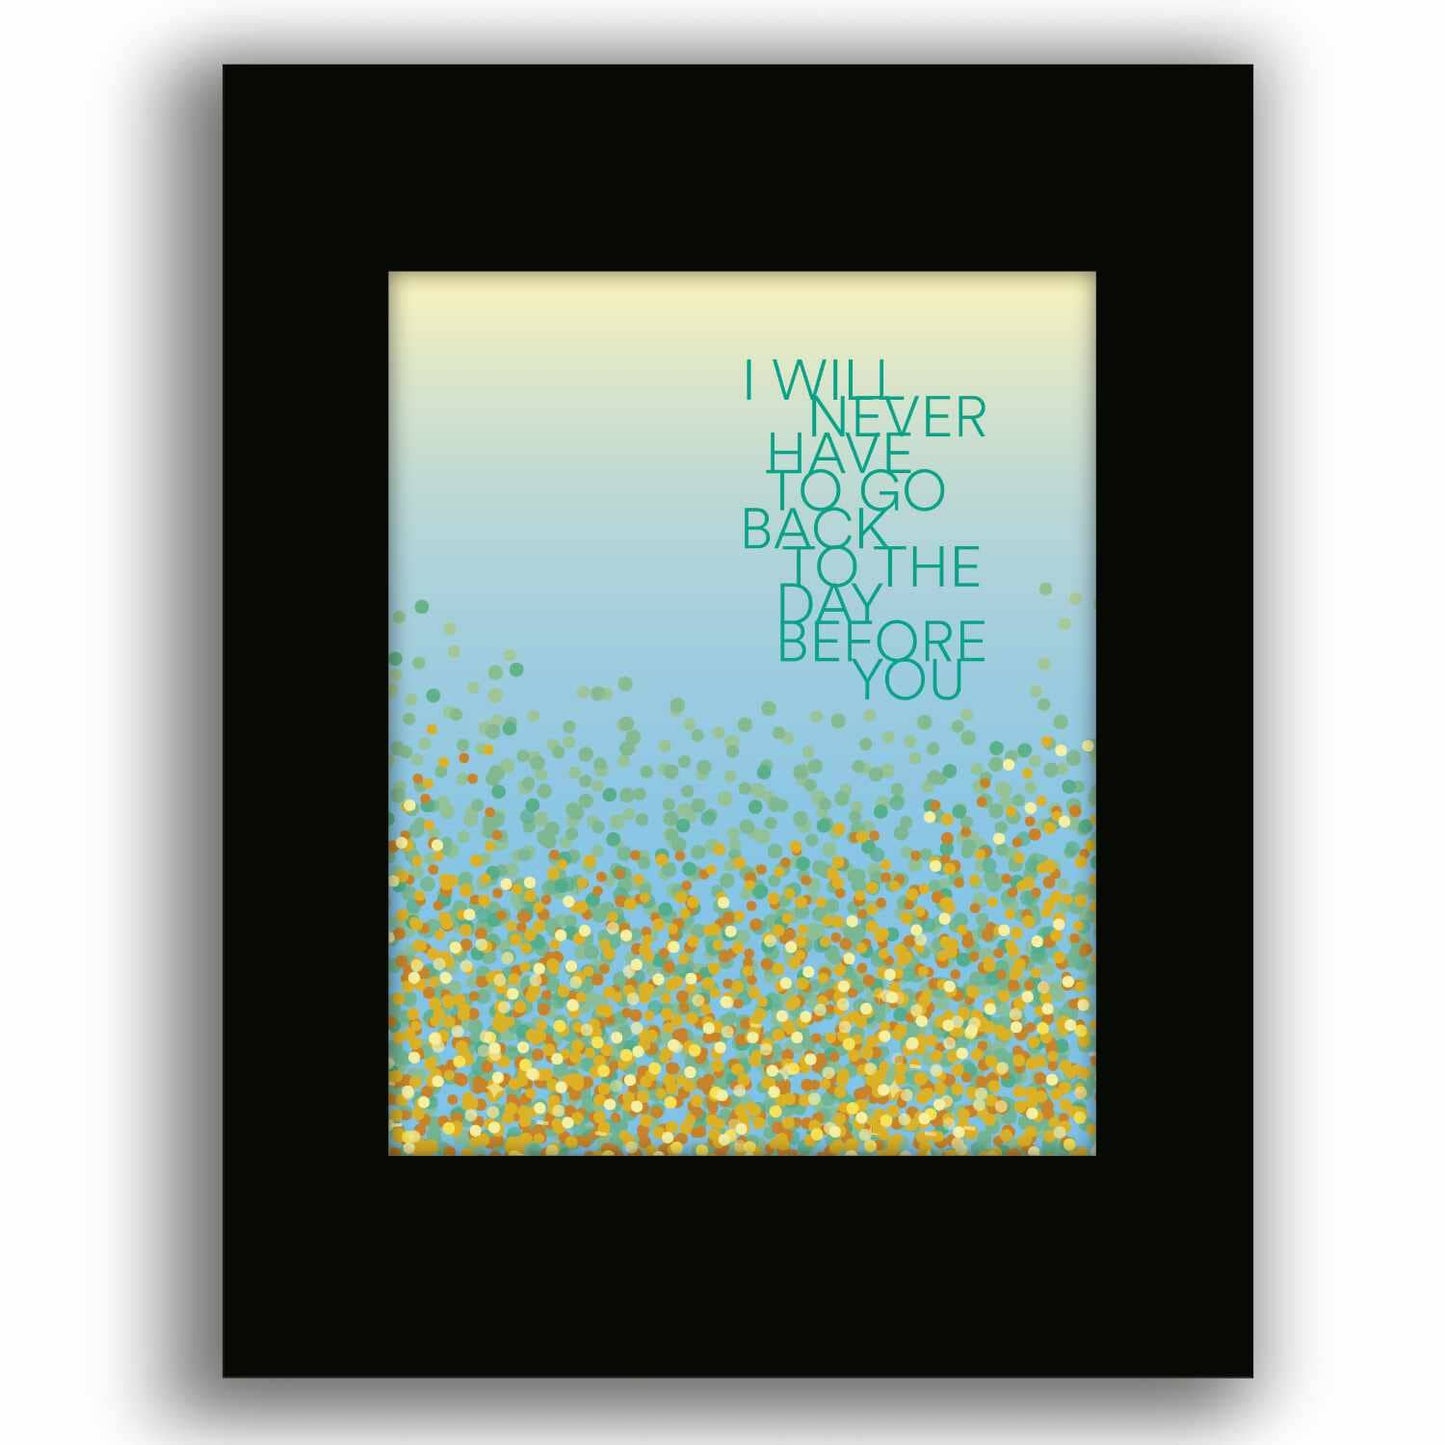 The Day Before You by Matthew West - Song Lyric Art Print Song Lyrics Art Song Lyrics Art 8x10 Black Matted Print 